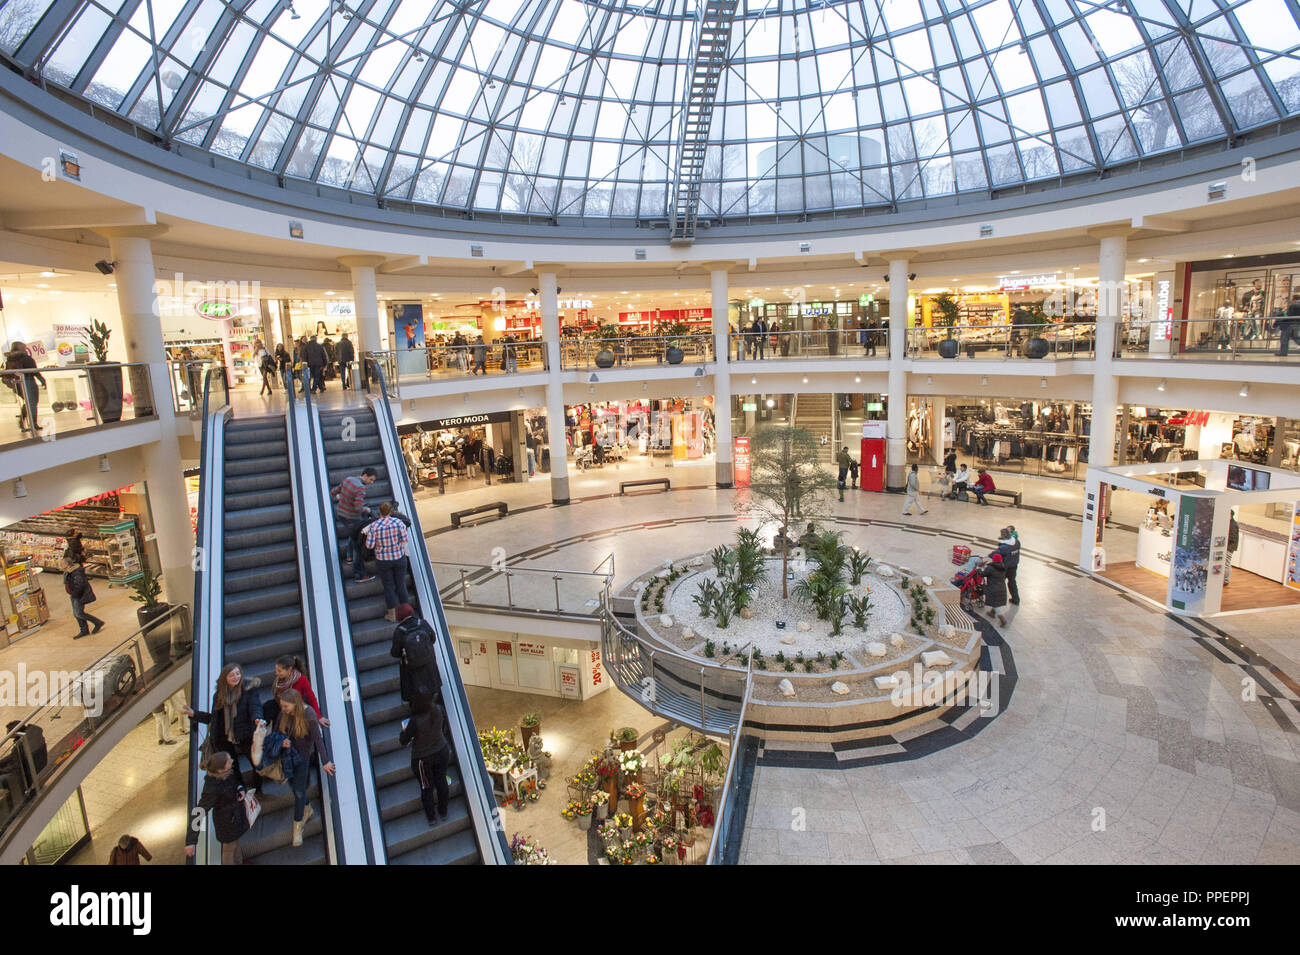 The glass dome in the PEP shopping center in Munich, Germany Stock Photo -  Alamy